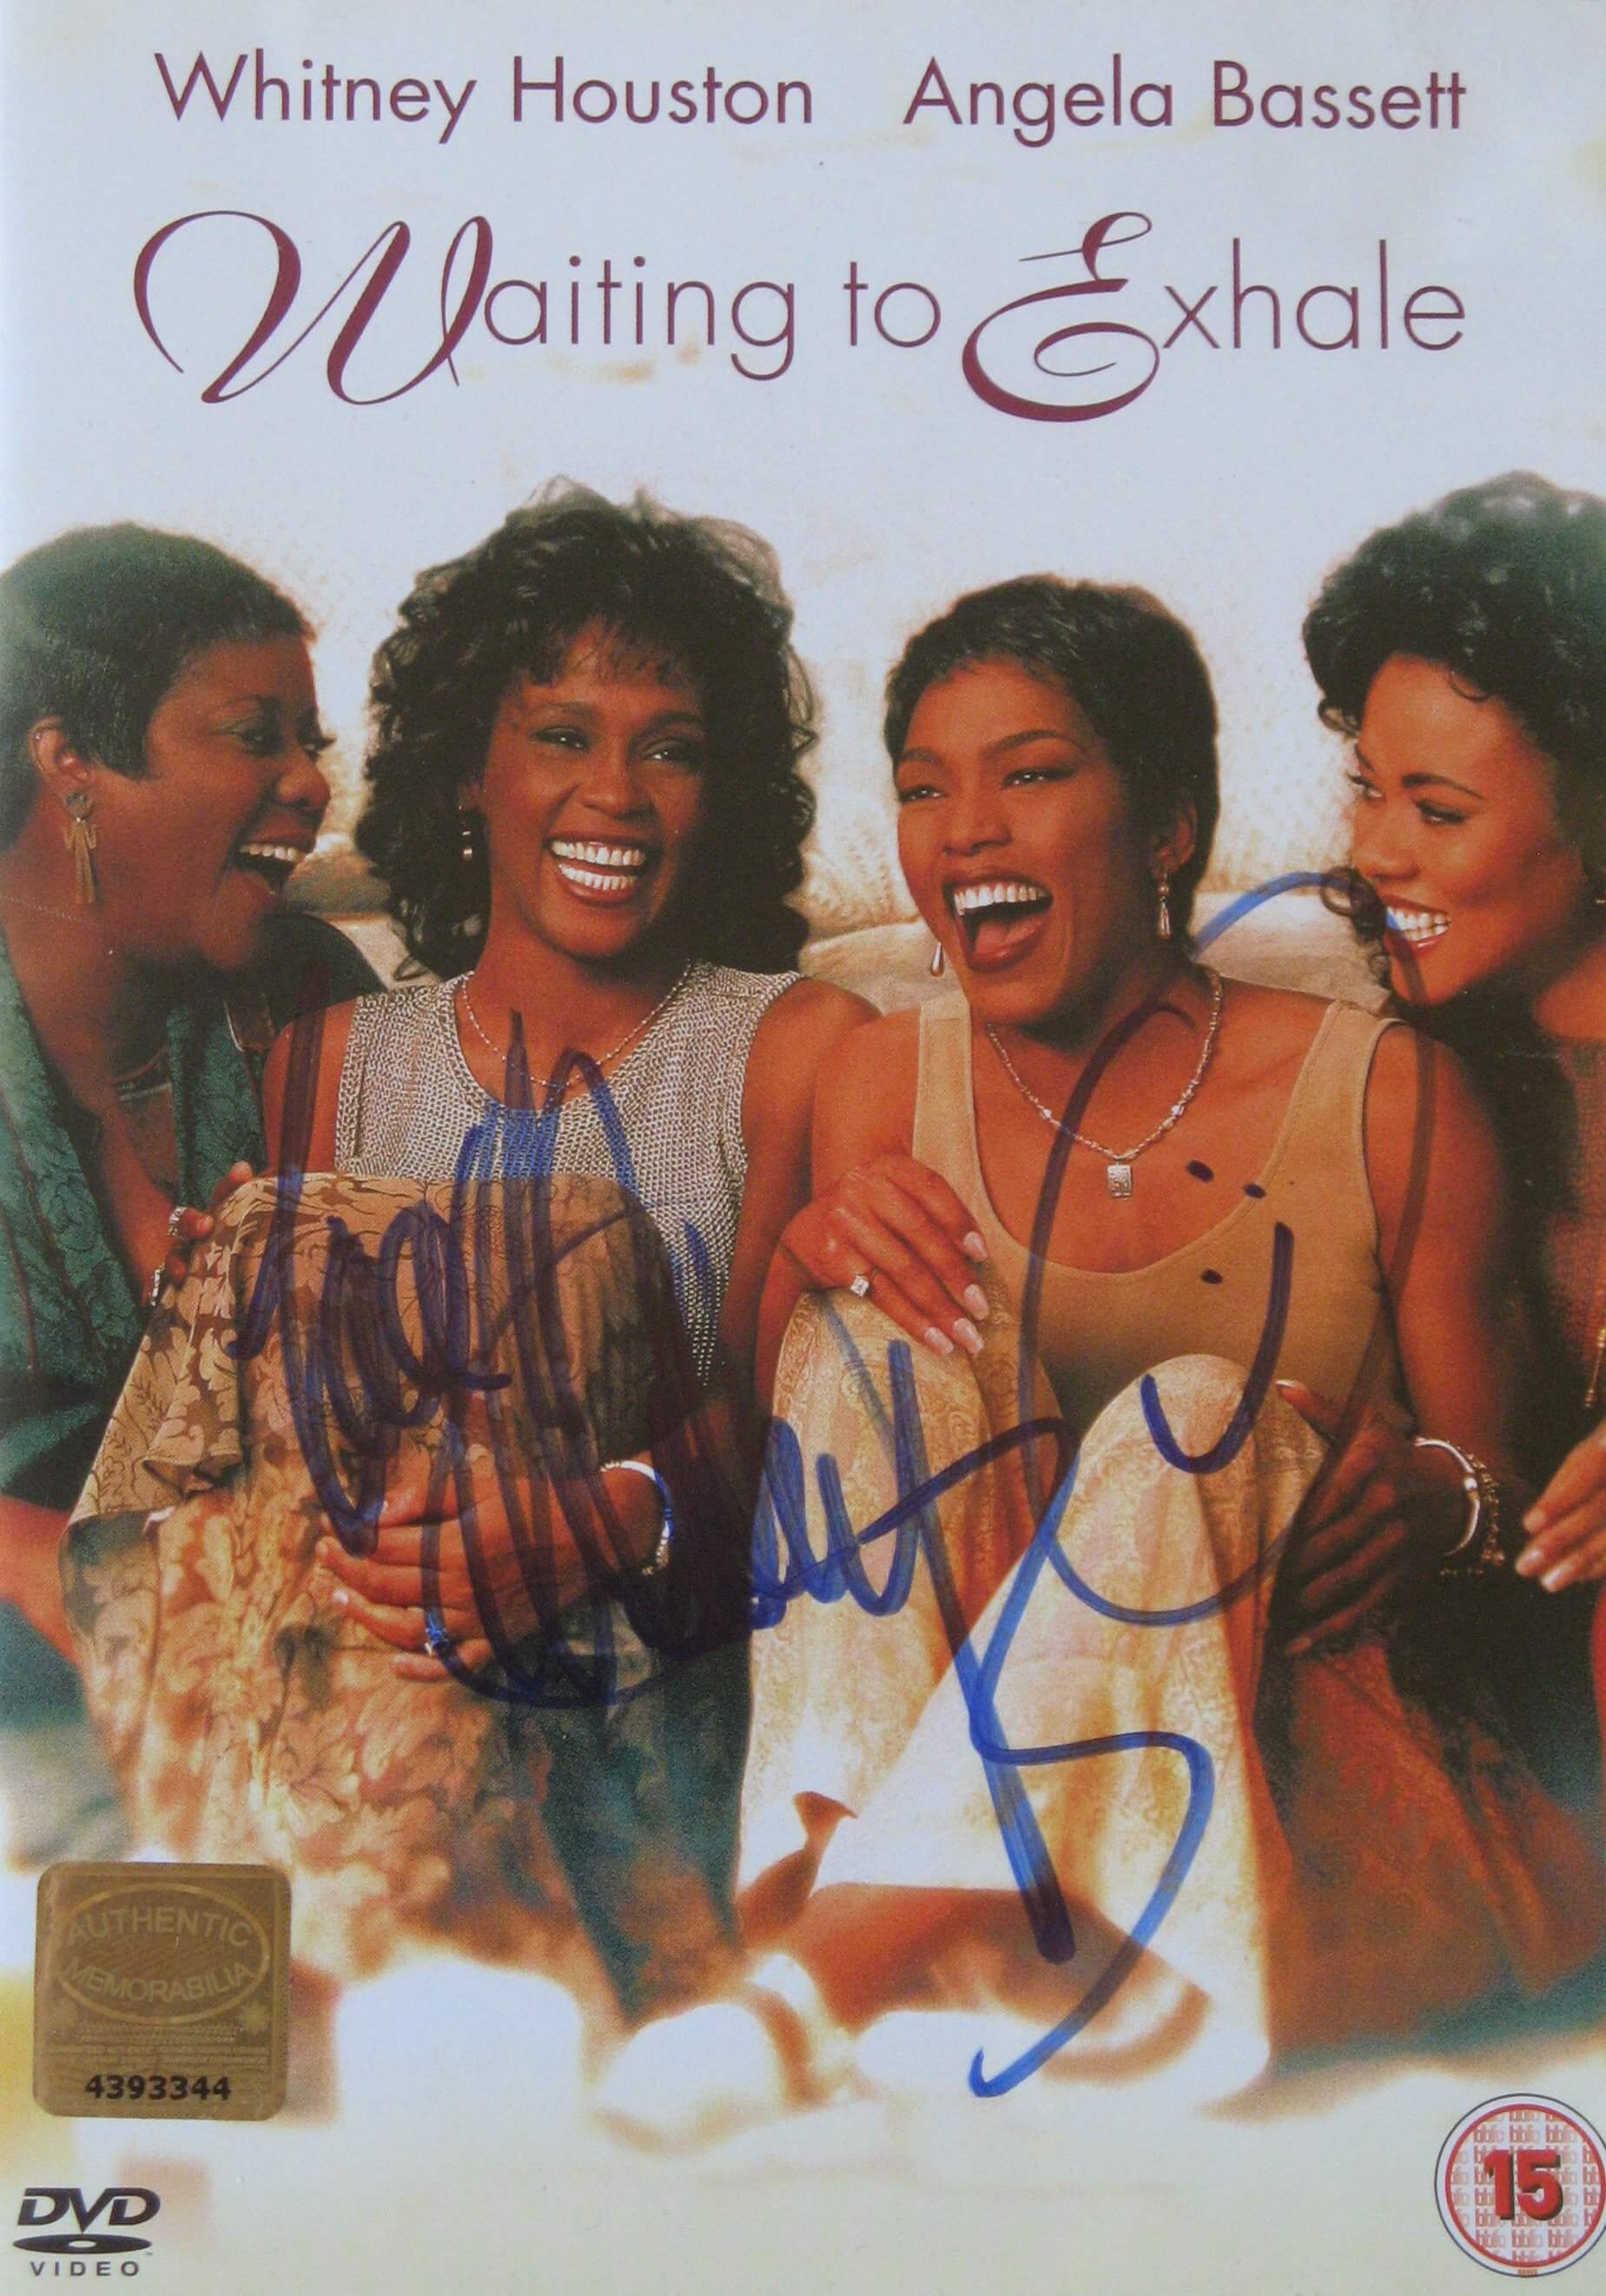 Whitney Houston: "Signed "Waiting To Exhale"" DVD Cover...